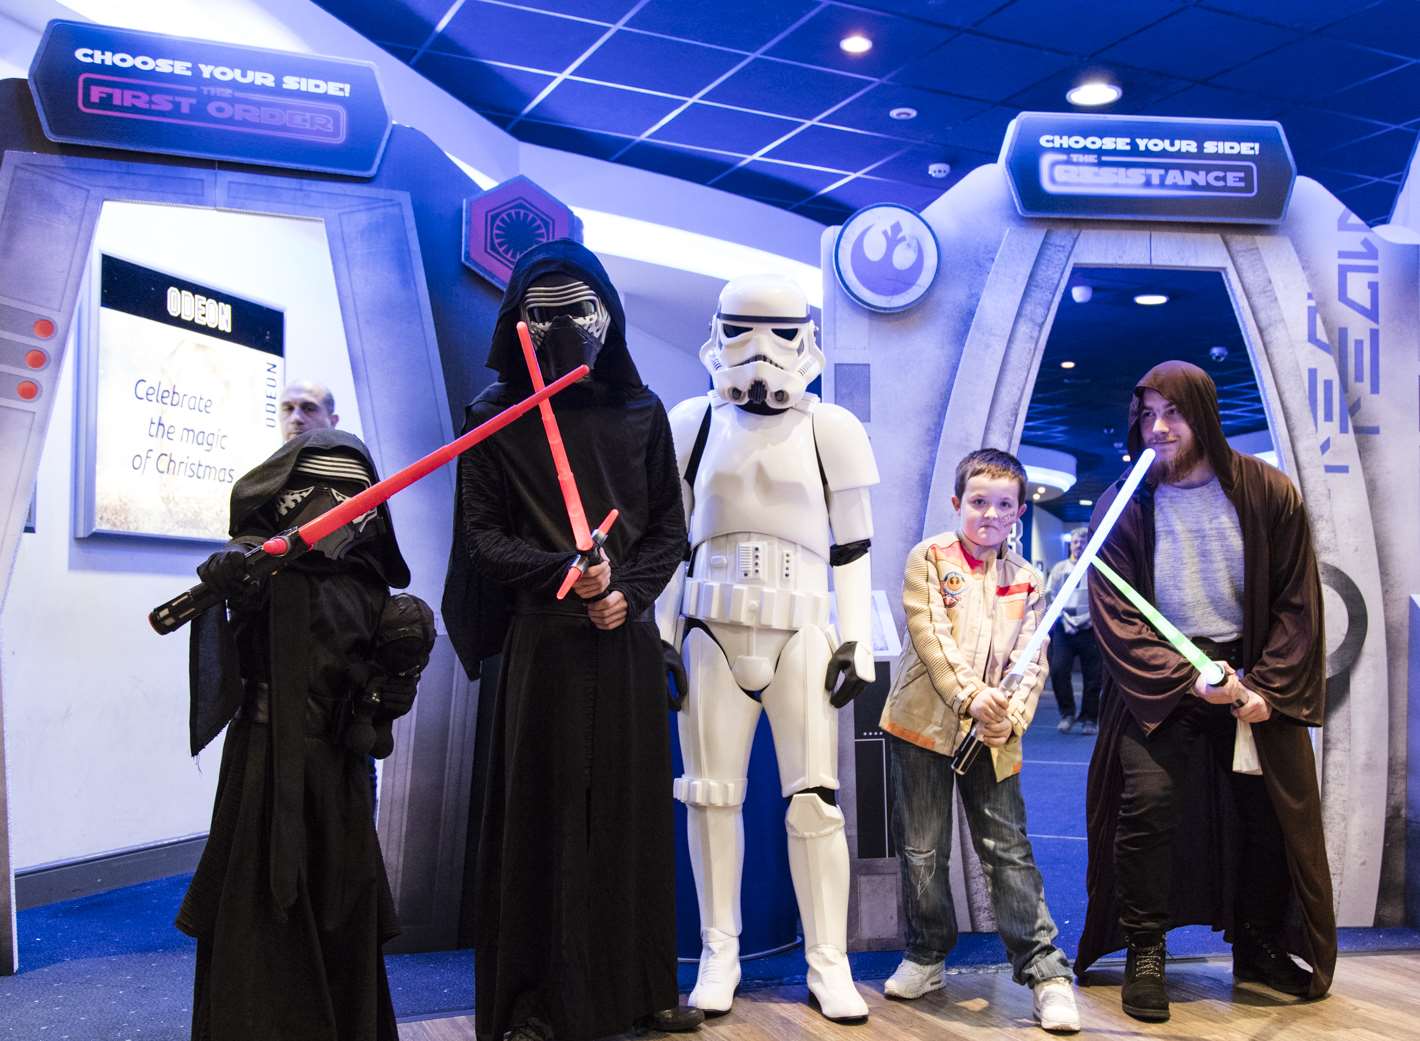 'Choose your side' Star Wars display at Chatham Odeon